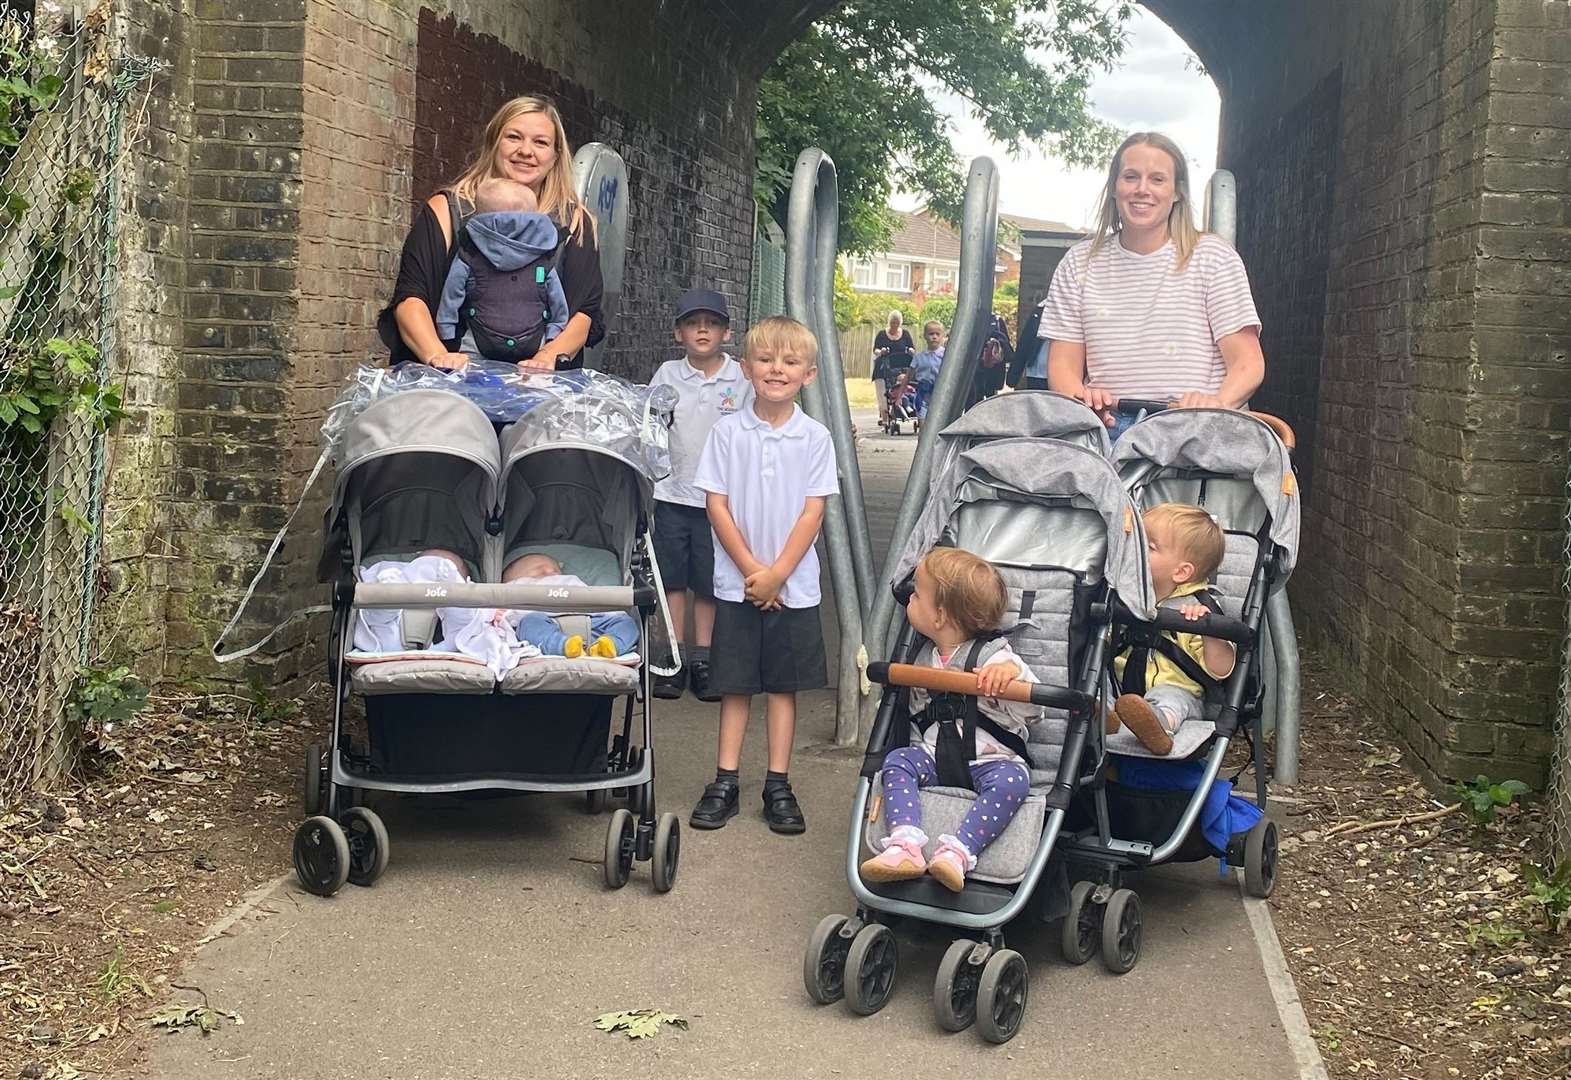 'I can't get my triplets through barriers'